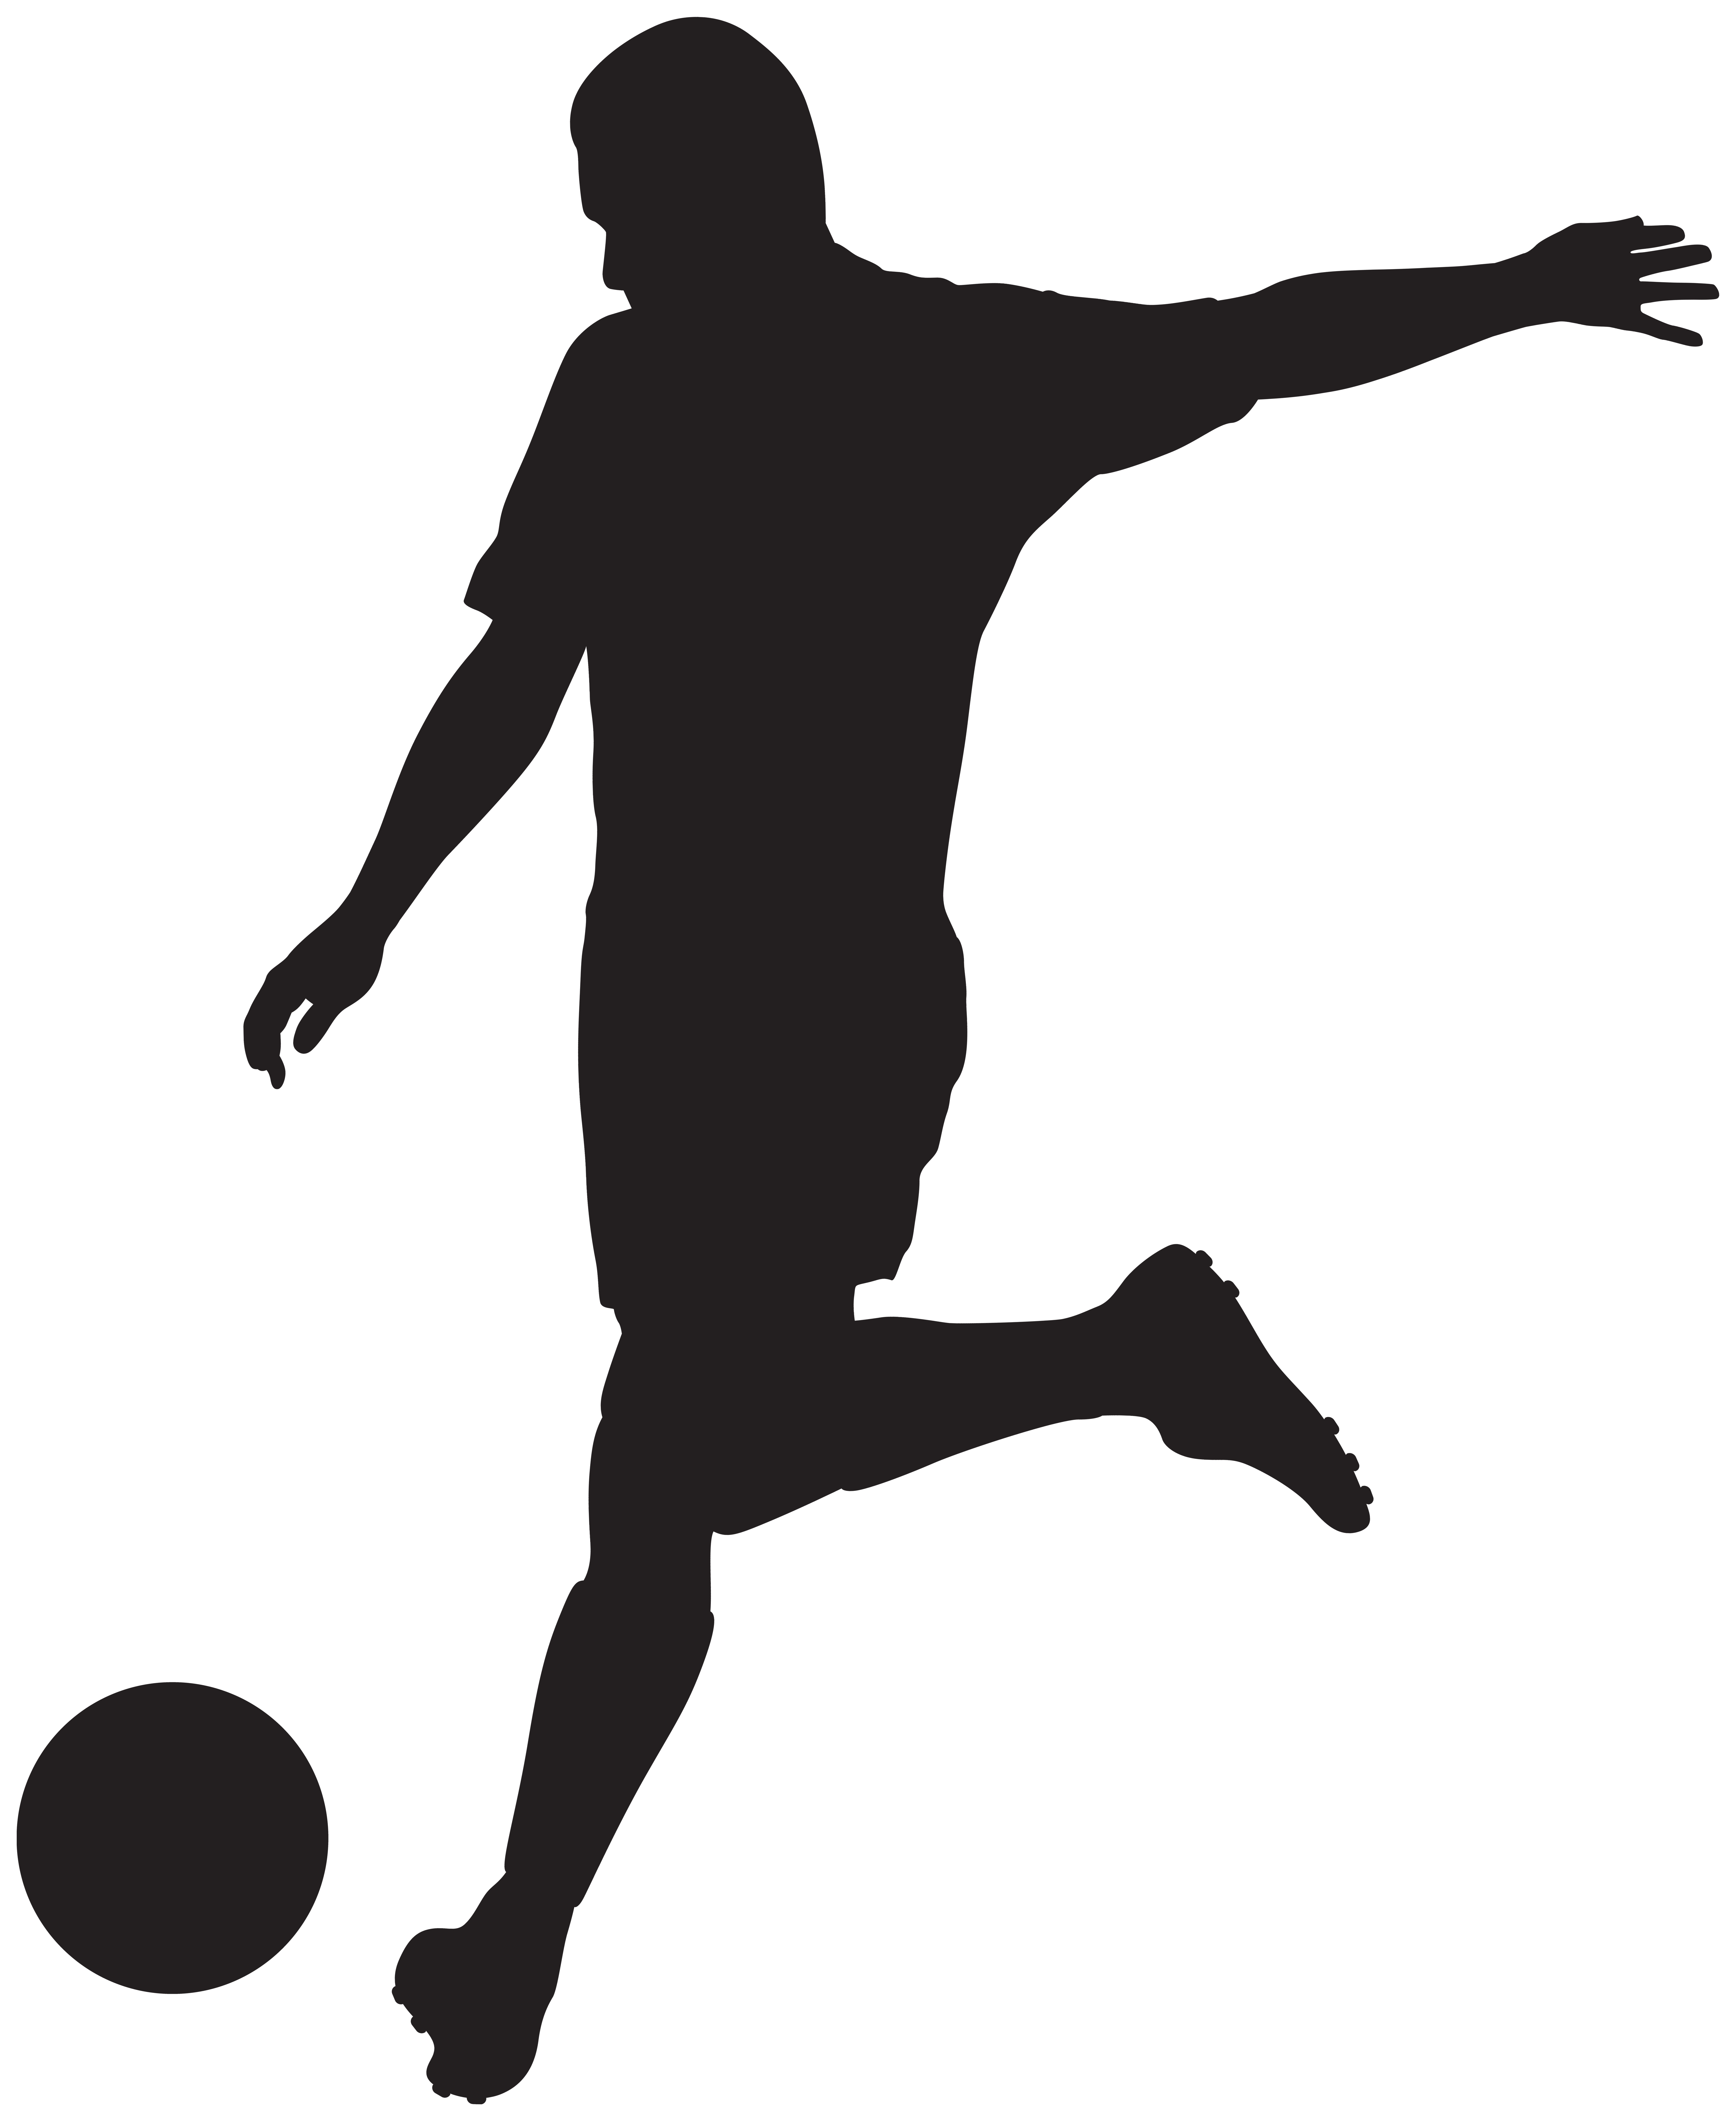 Football Player Silhouette Transparent Image.